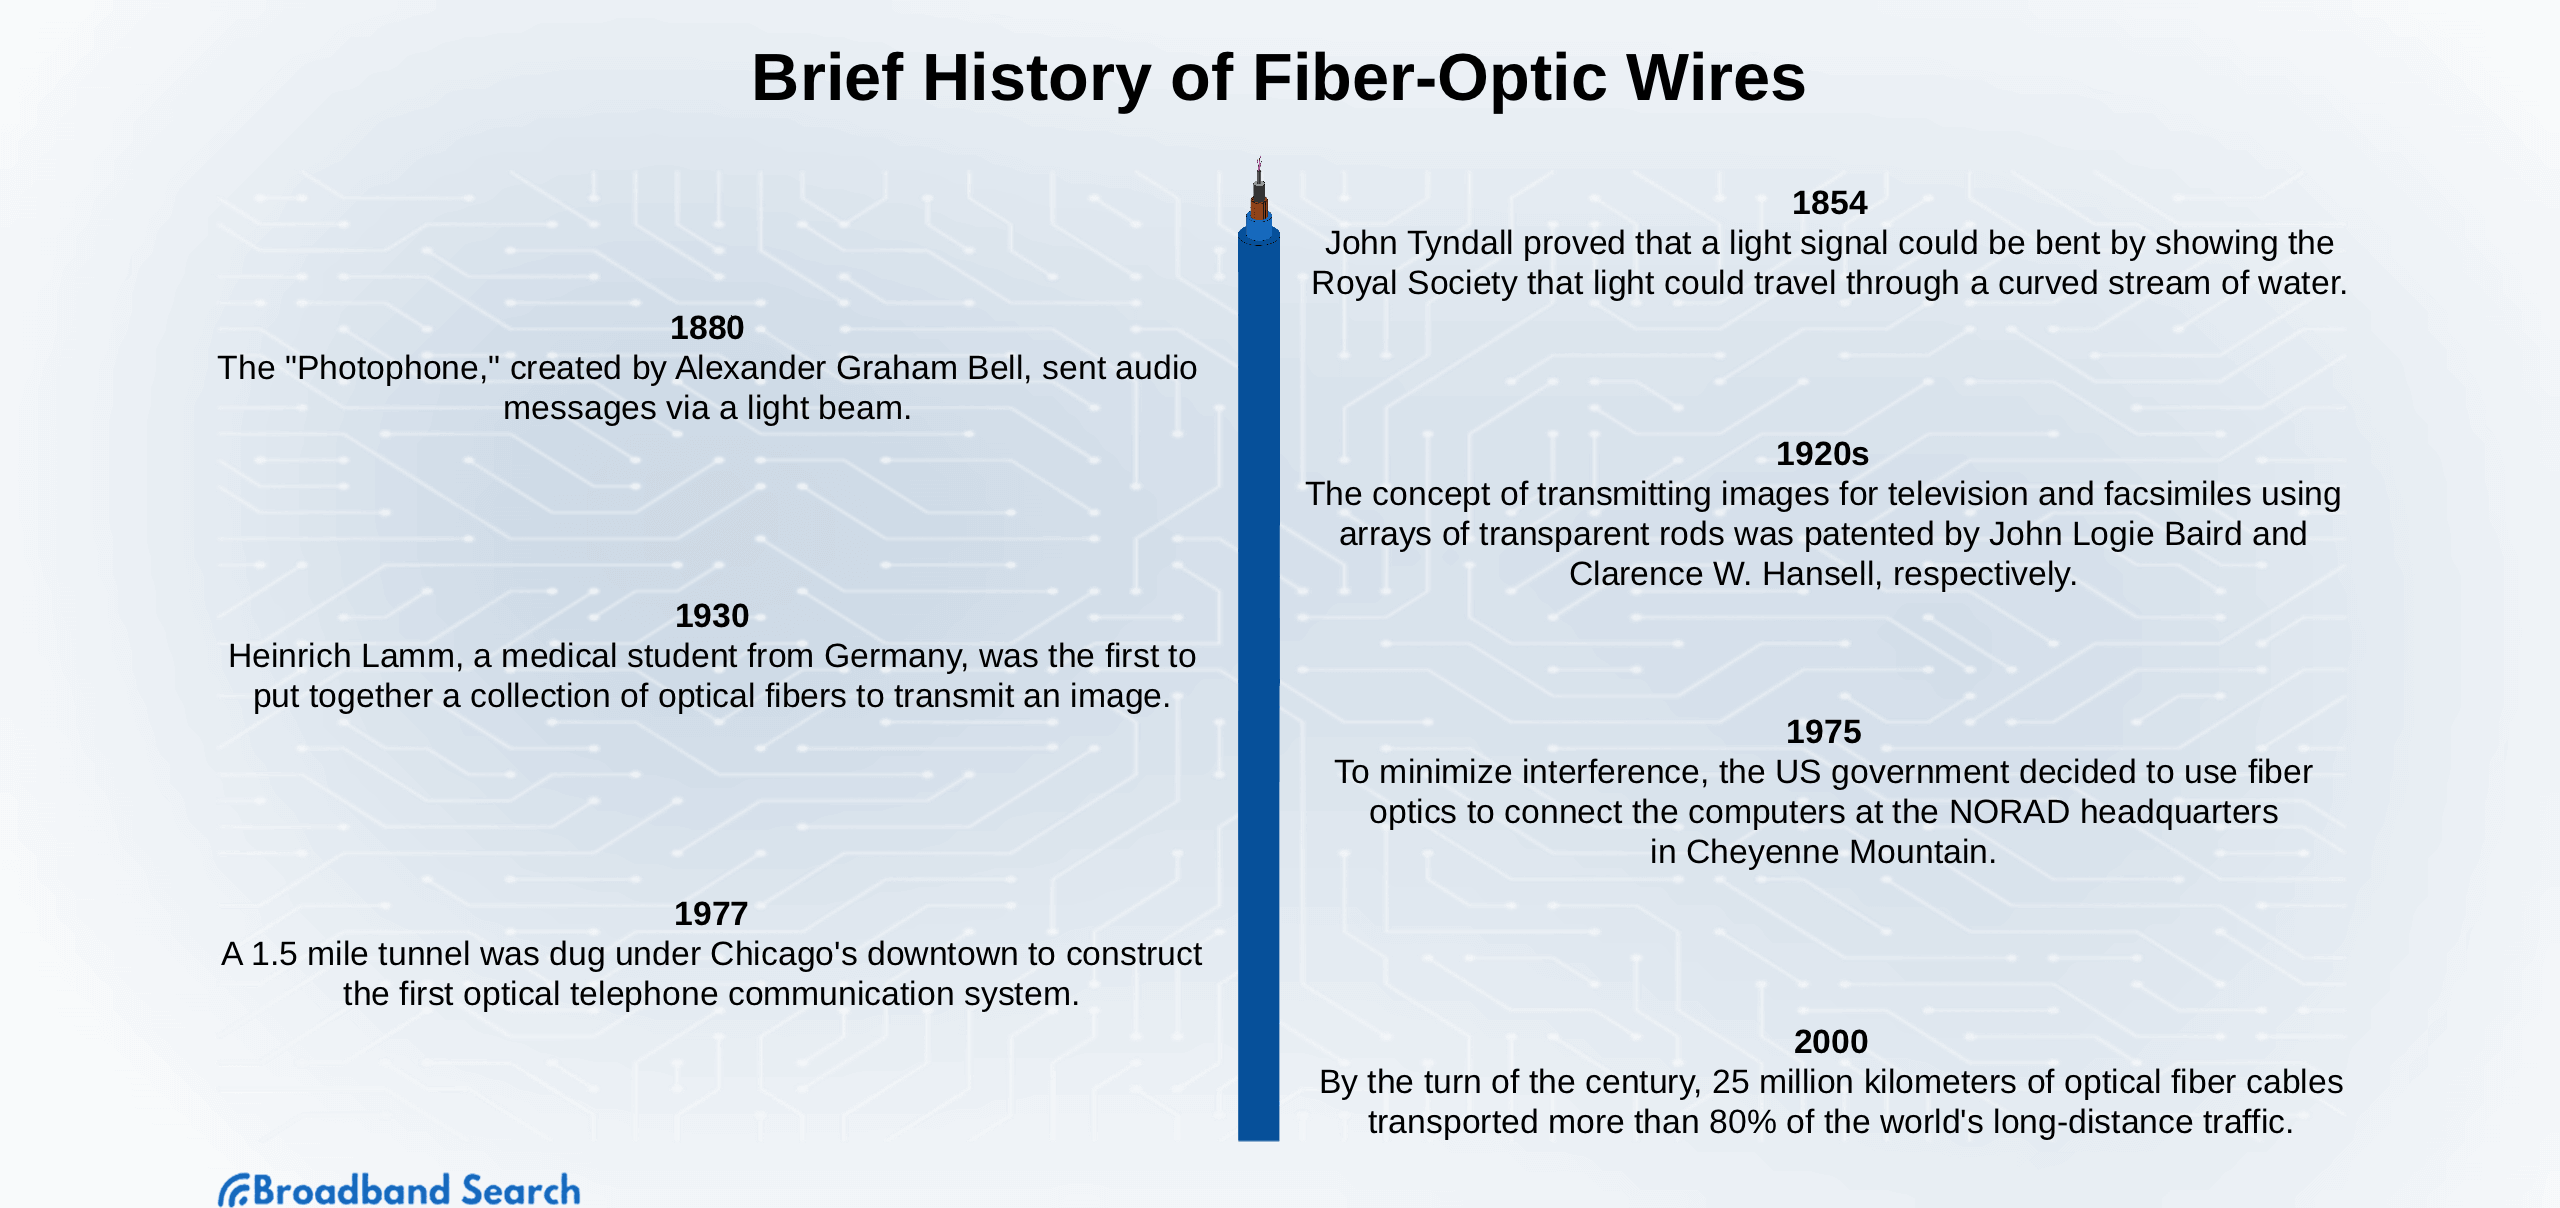 Brief history of fiber optic wires